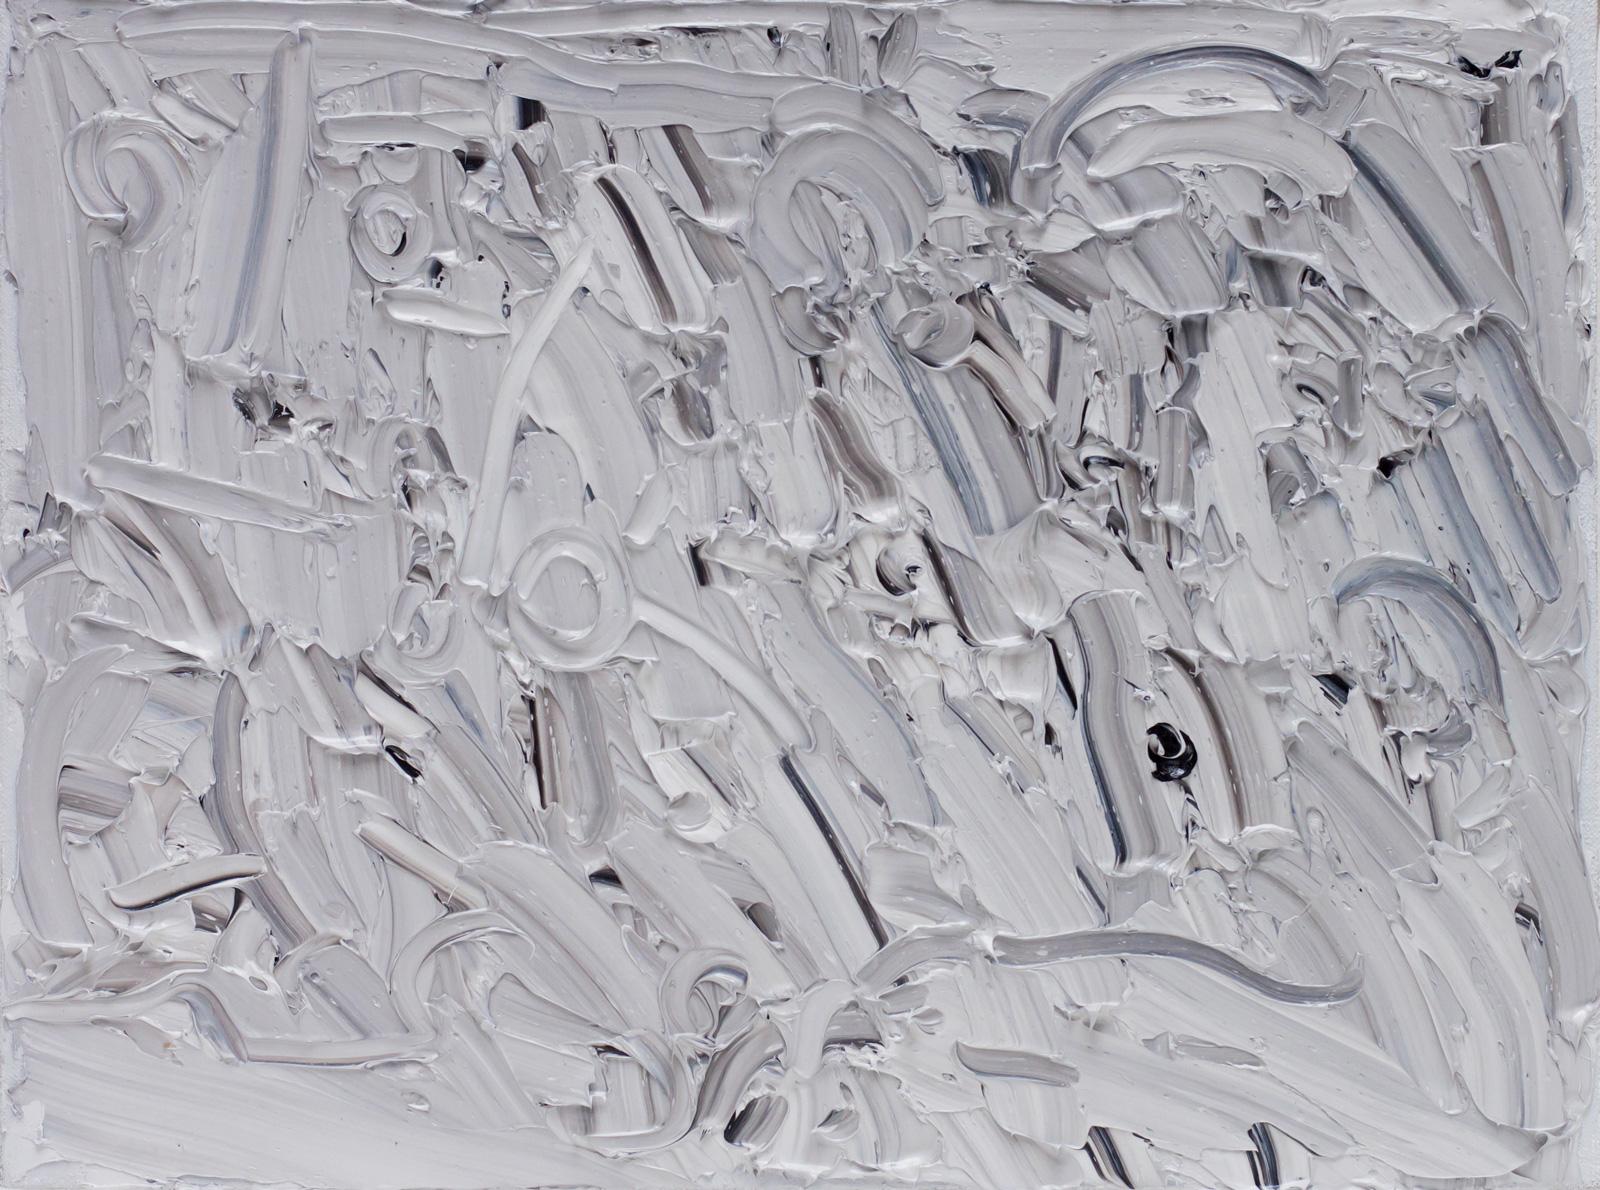 Horizontal (2012); 12 by 16 inches; oil on linen